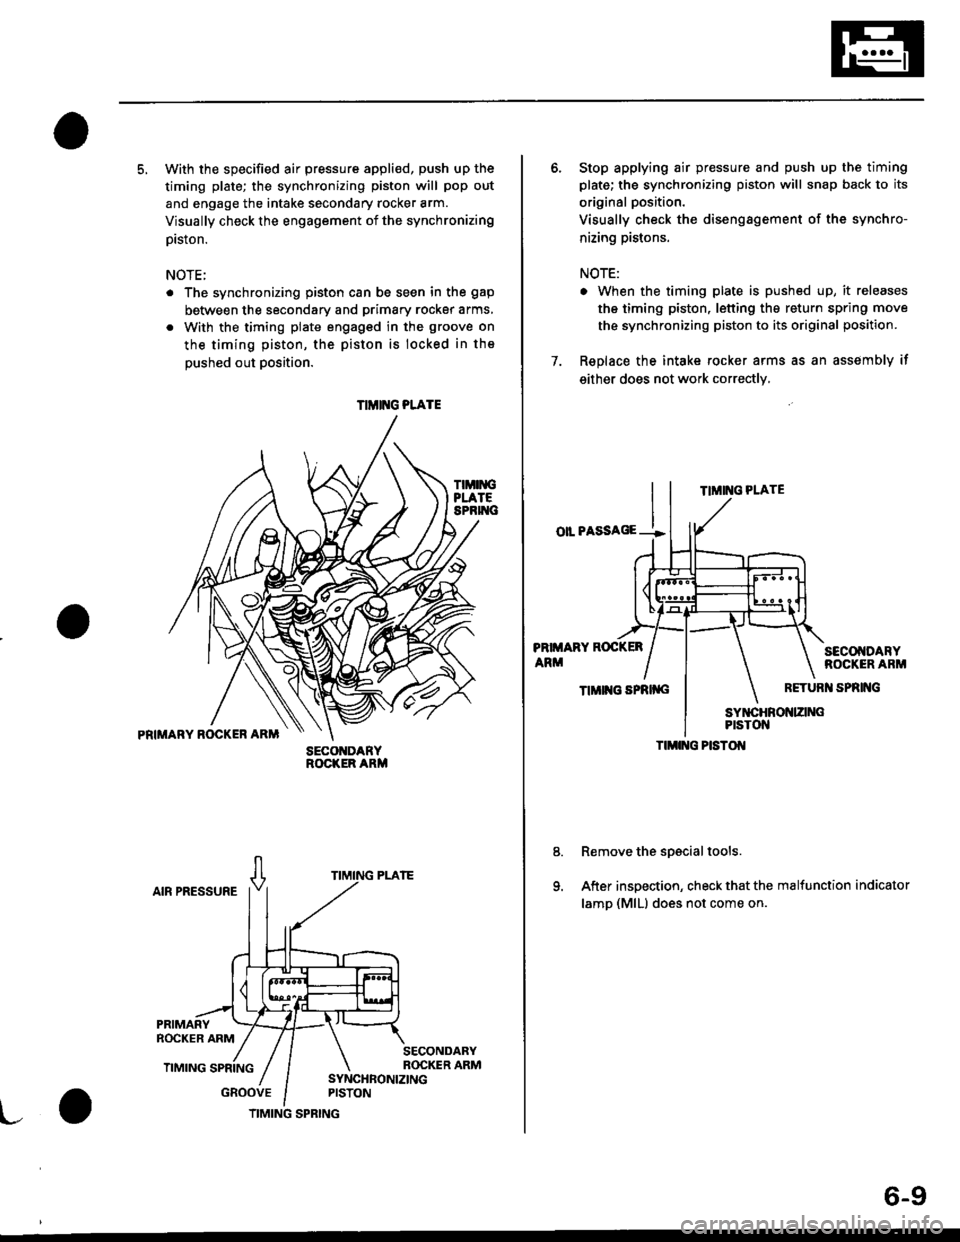 HONDA CIVIC 1999 6.G Workshop Manual 5. With the specified air pressure appli€d, push up the
timing plate; the synchronizing piston will pop out
and engage the intake secondary rocker arm.
Visually check the engagement of the synchroni